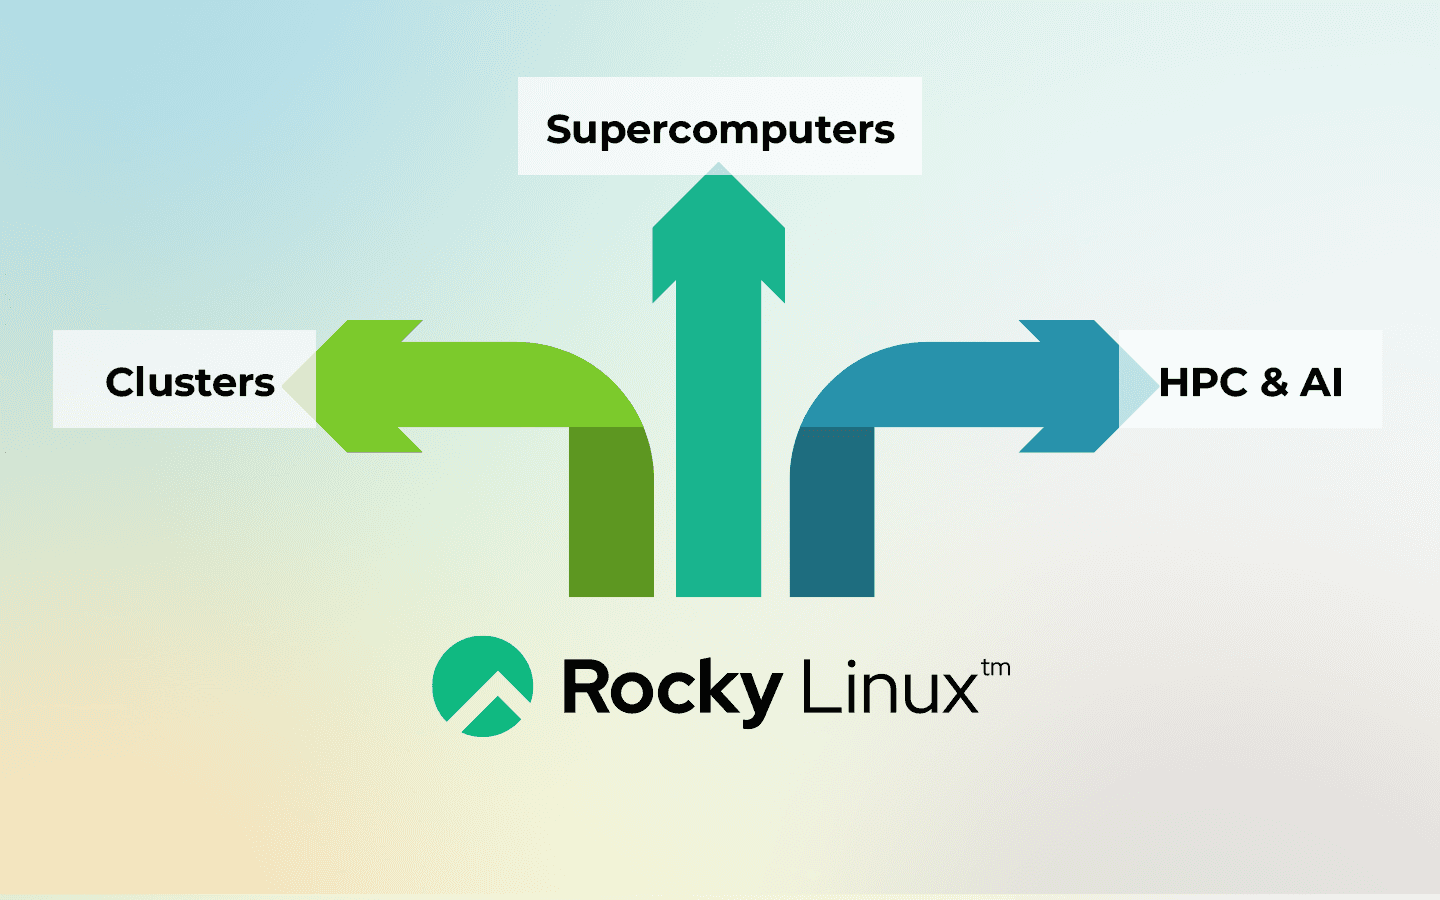 Rocky Linux Powers Supercomputers, Clusters, HPC, &amp; AI